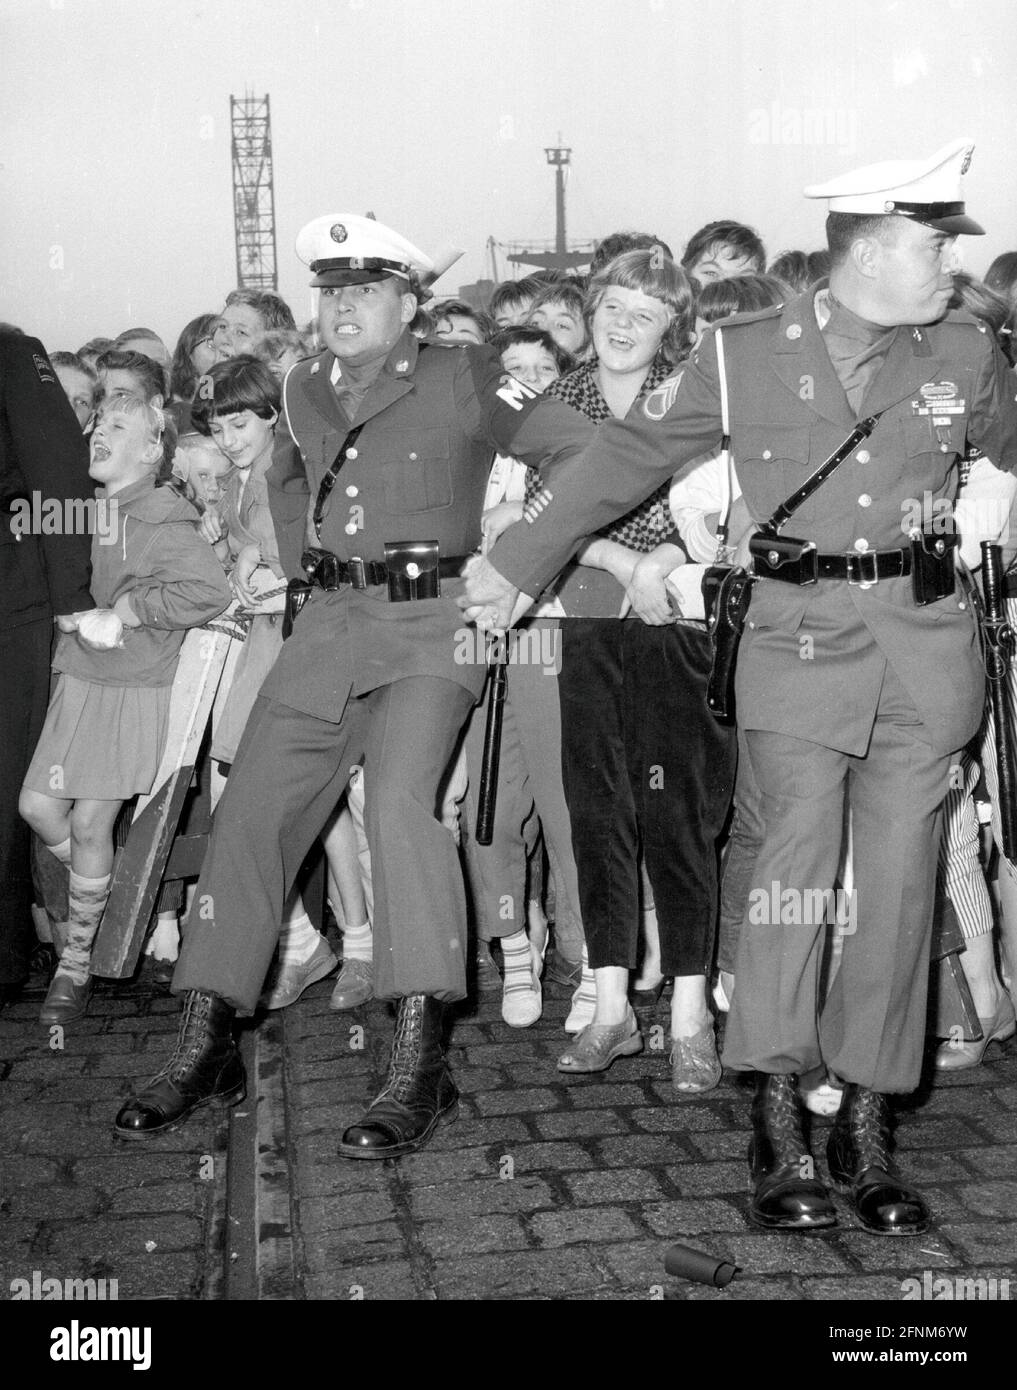 Presley, Elvis, 8.1.1935 - 16.8.1977, American singer and actor, fans during his arrival in Germany, ADDITIONAL-RIGHTS-CLEARANCE-INFO-NOT-AVAILABLE Stock Photo